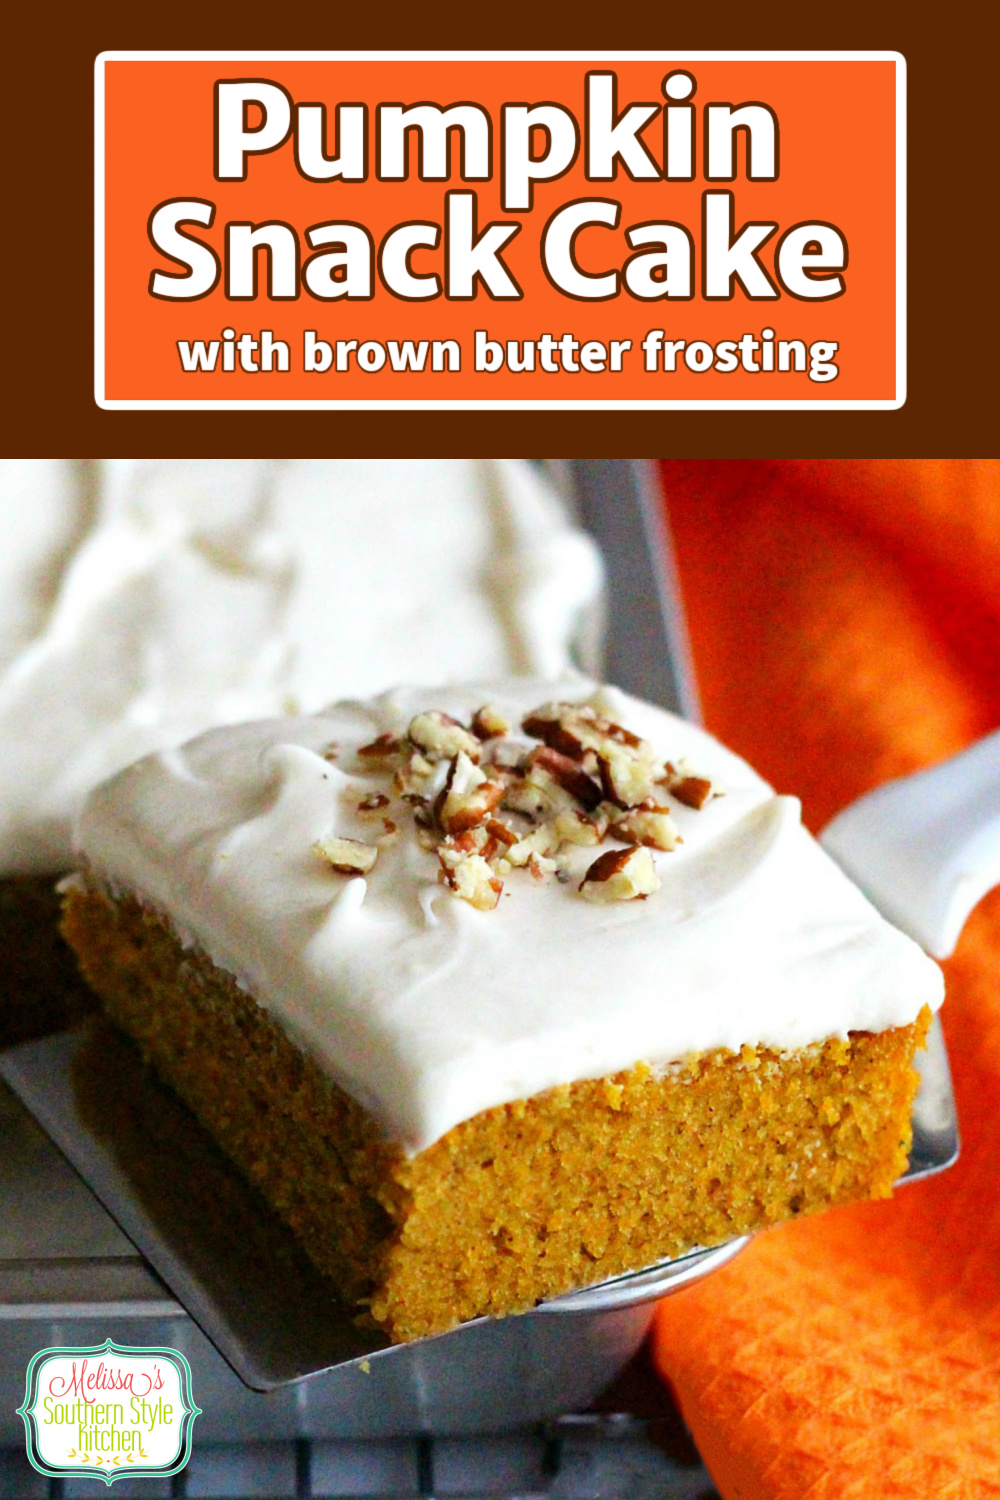 This Pumpkin Snack Cake with Browned Butter Frosting is perfect for any fall or holiday gathering #pumpkincake #pumpkinsnackcake #pumpkinrecipes #pumpkinspice #brownedbutterfrosting #brownedbutter #thanksgivingcakes #fallbaking #fallrecipes #pumpkinspicecake via @melissasssk